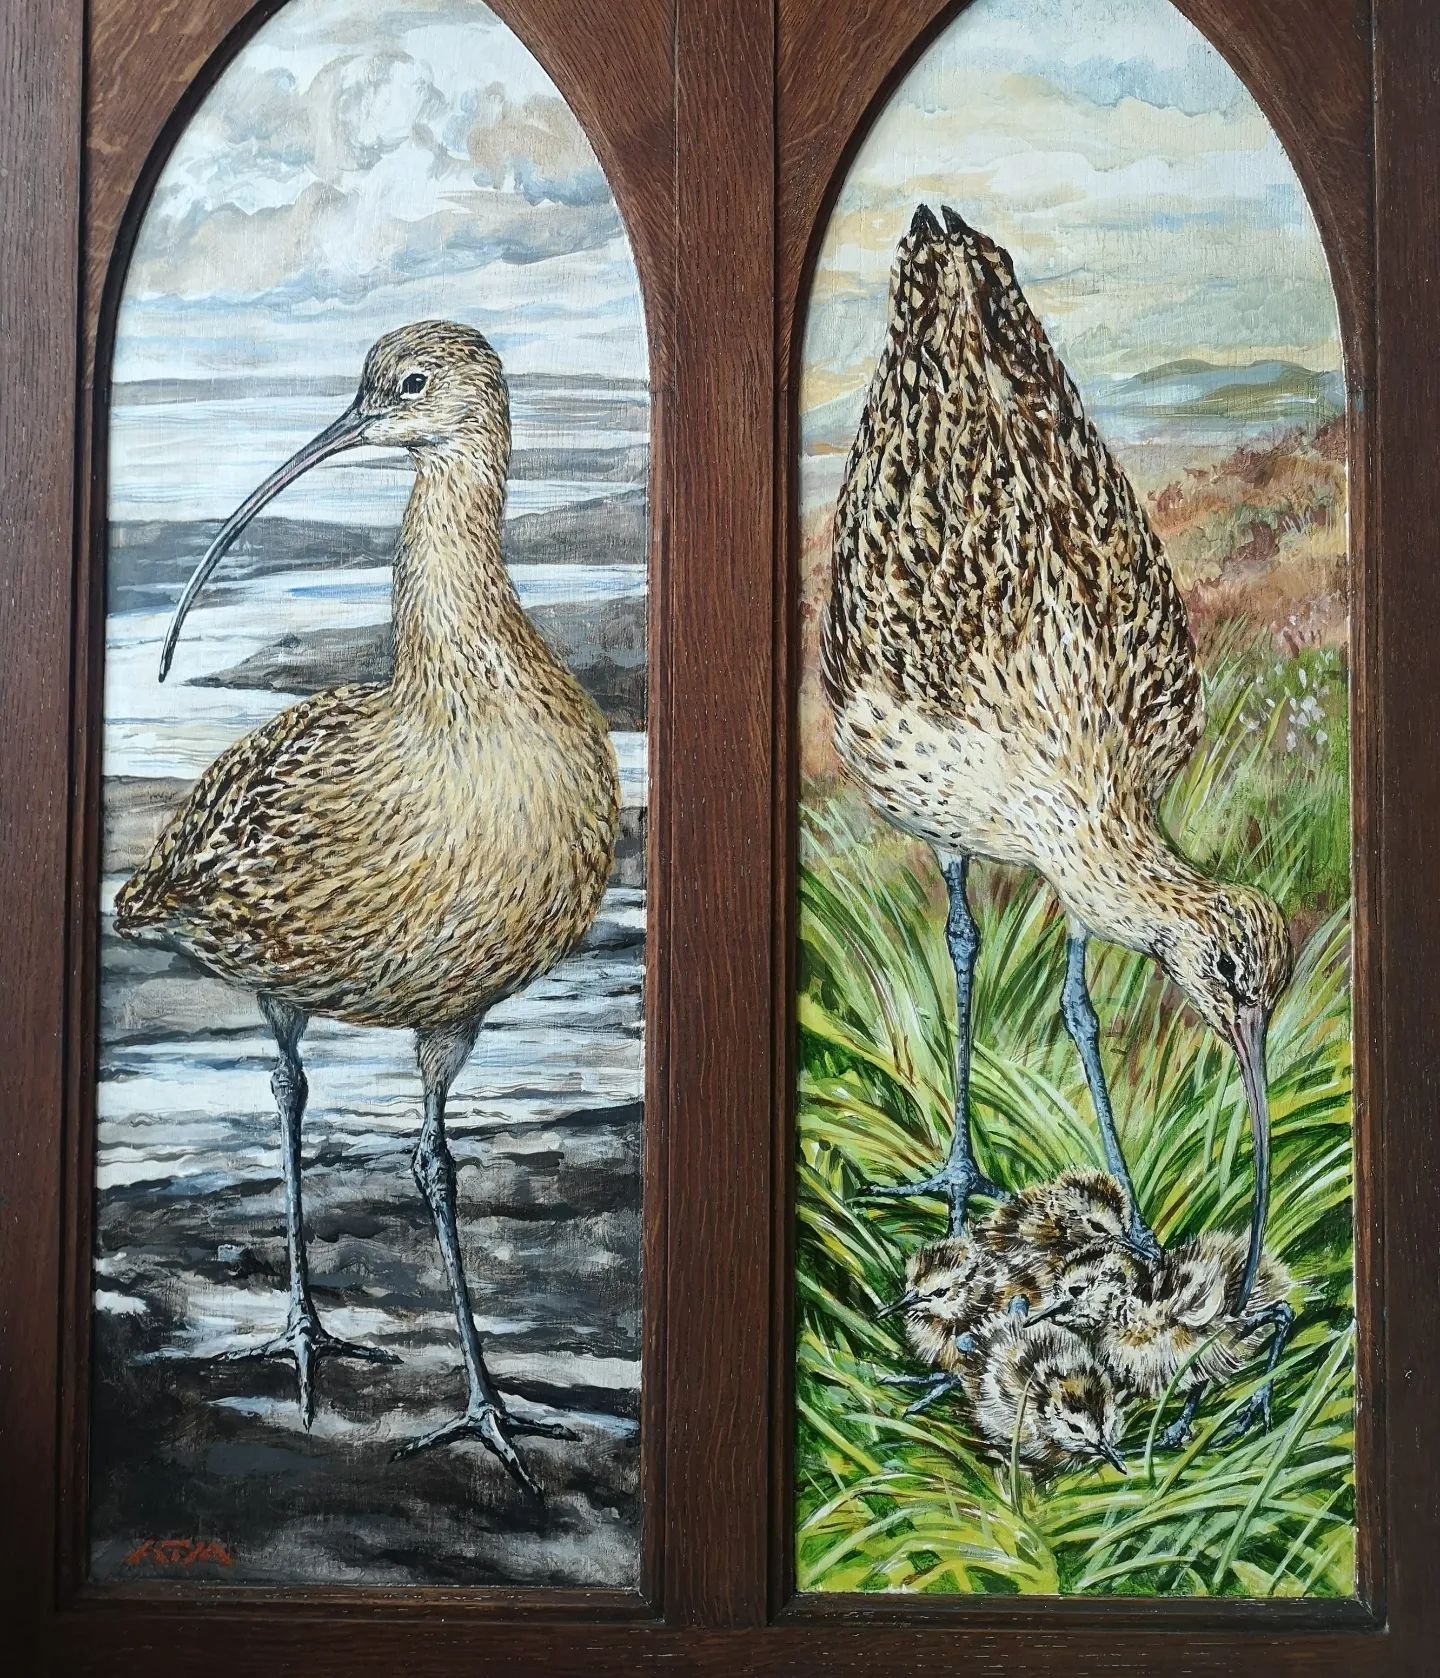 My Curlew Altarpiece is up for auction at galabid.com/wcd2024/items to raise funds for @curlewaction to protect this magnificent bird @marycolwell1

Painted on solid oak structure reclaimed from a church 128 x 80 x 9 cm

Curlews are disappearing so f